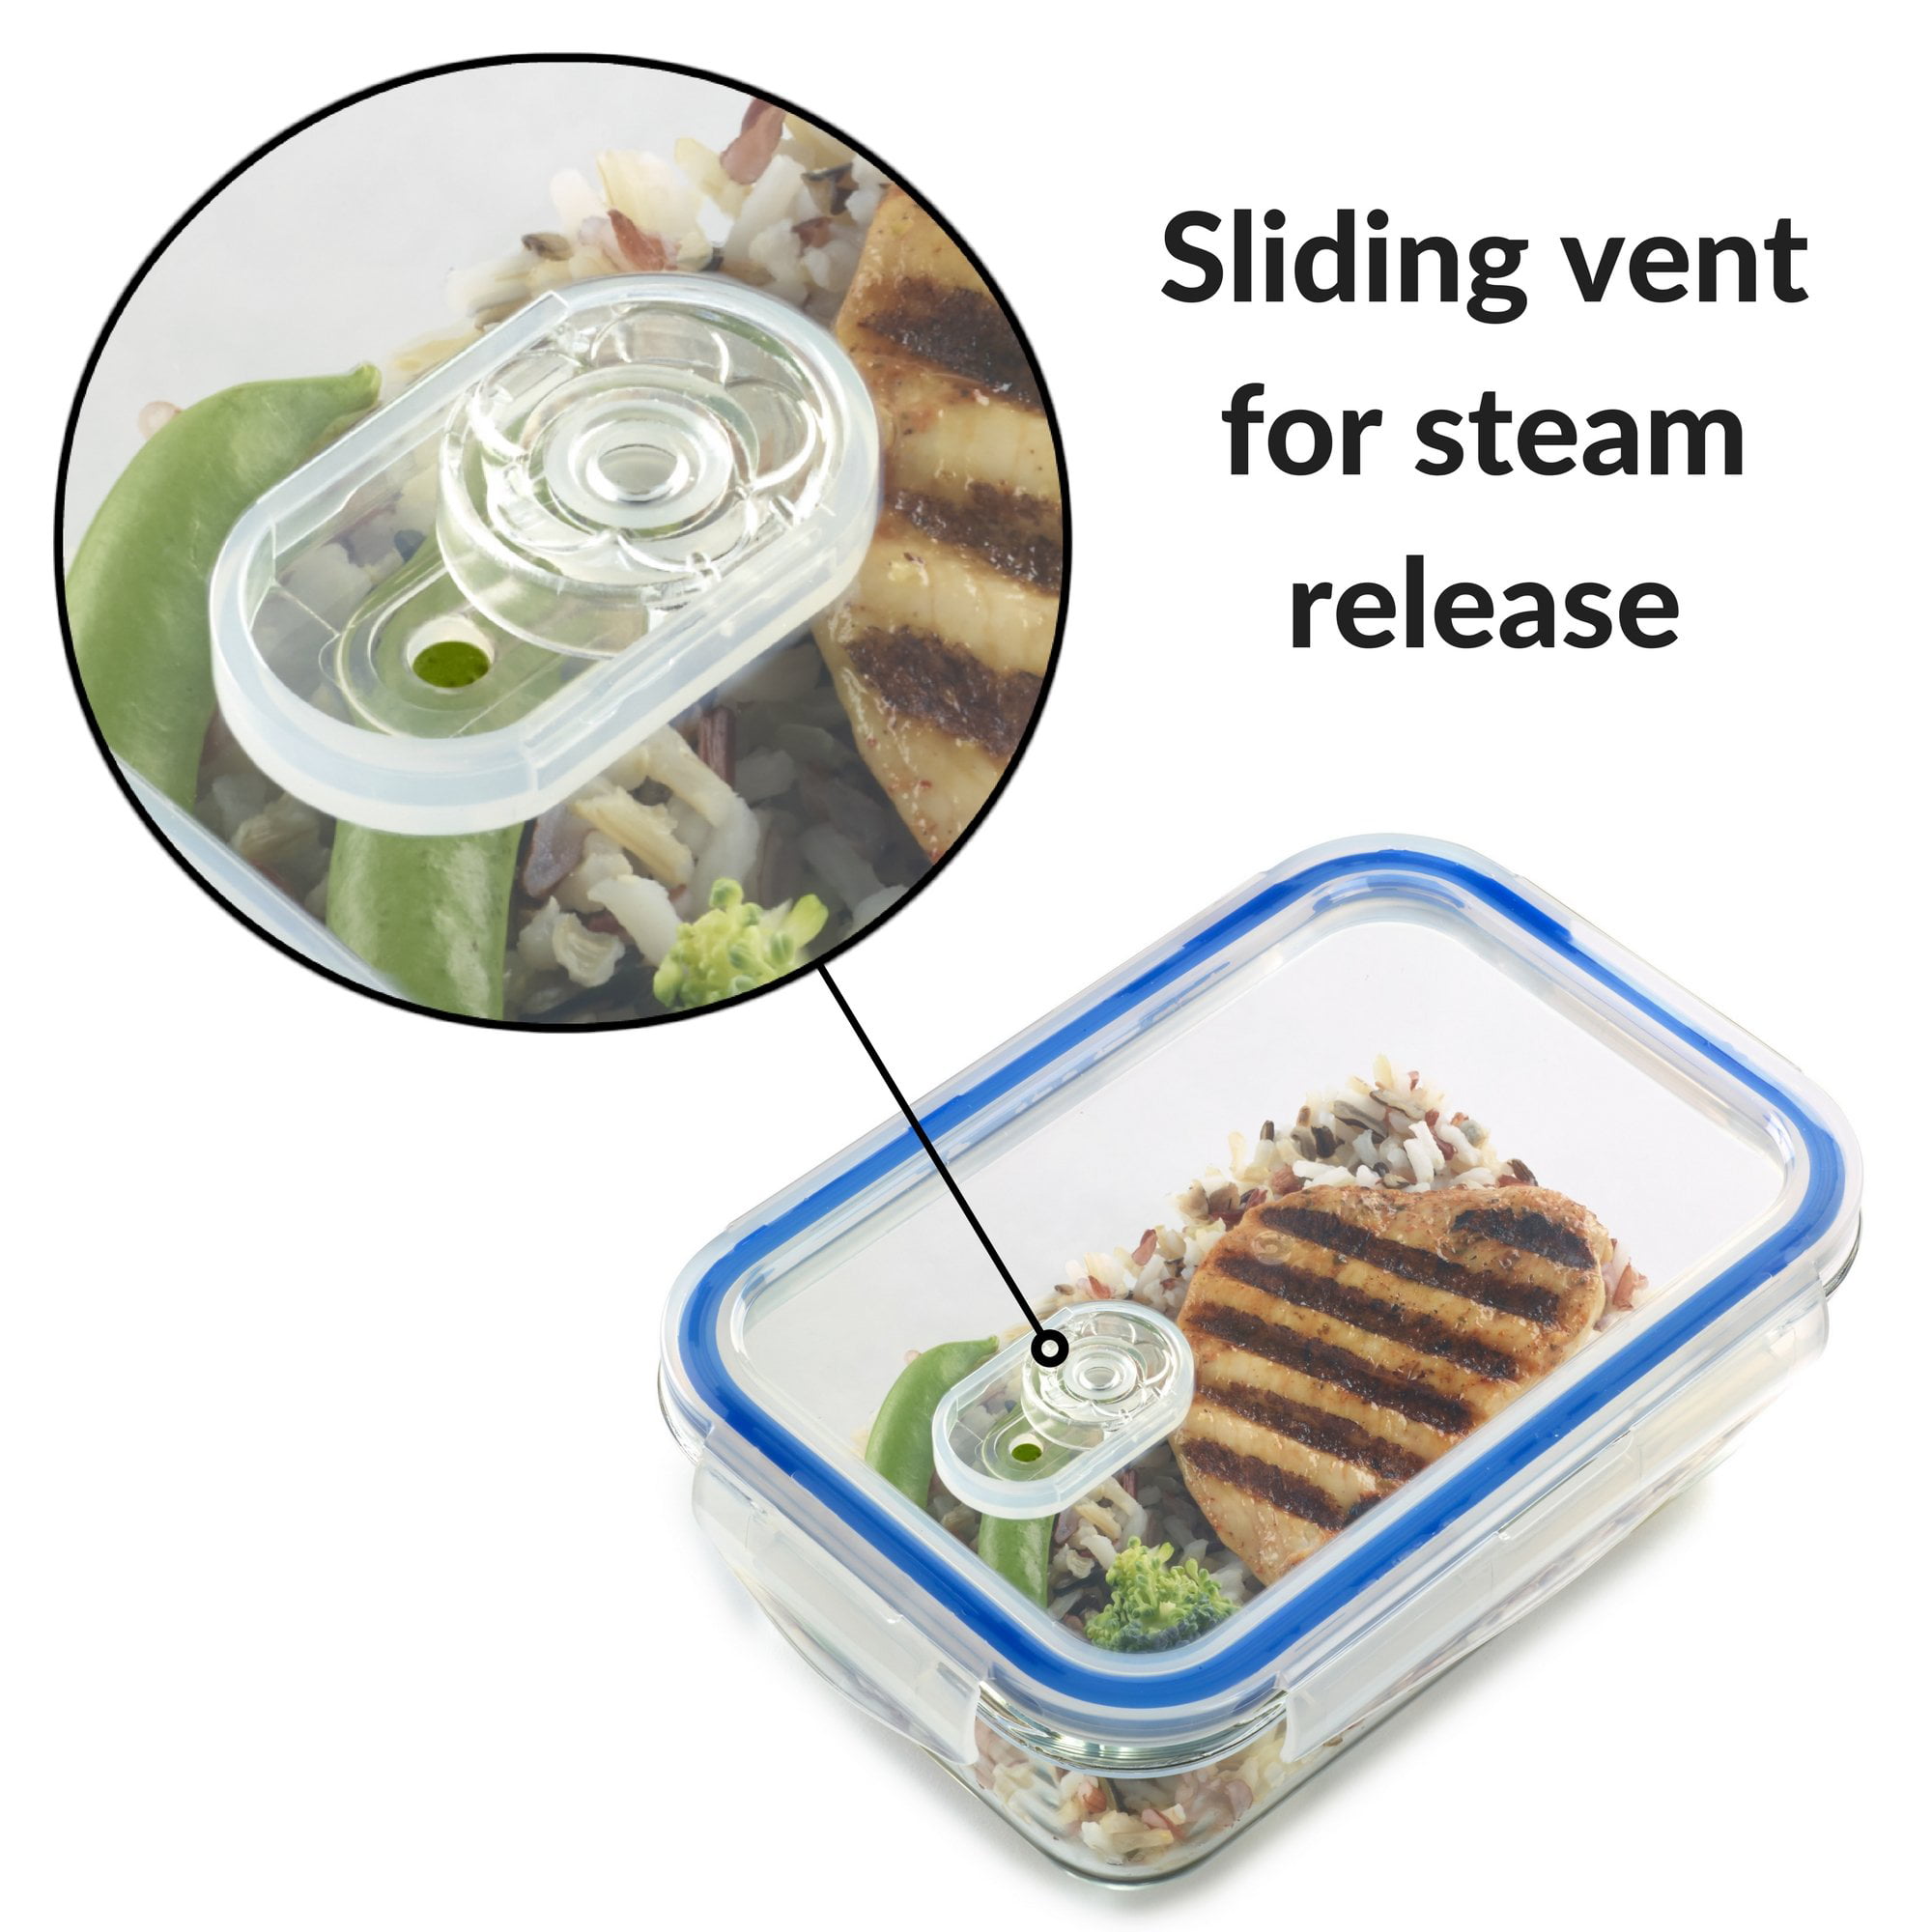 1pc 1040ml Glass Lunch Box With Dividers, Microwave Safe, Steaming